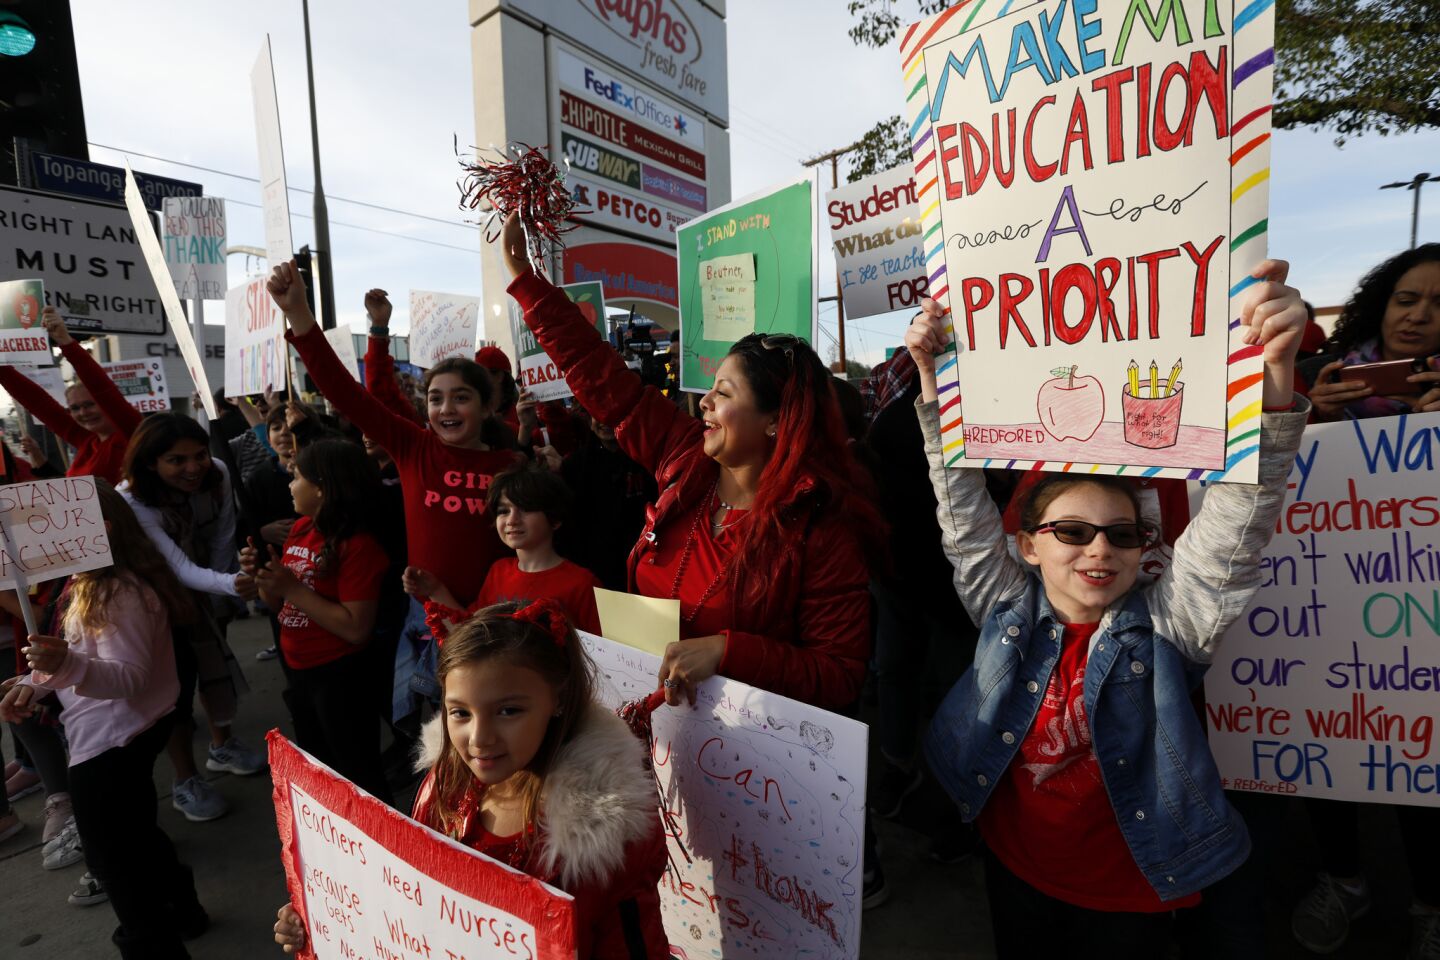 Parents, teachers, and students rally in support of teachers at the corner of Topanga Canyon and Ventura Blvd. in Woodland Hills.